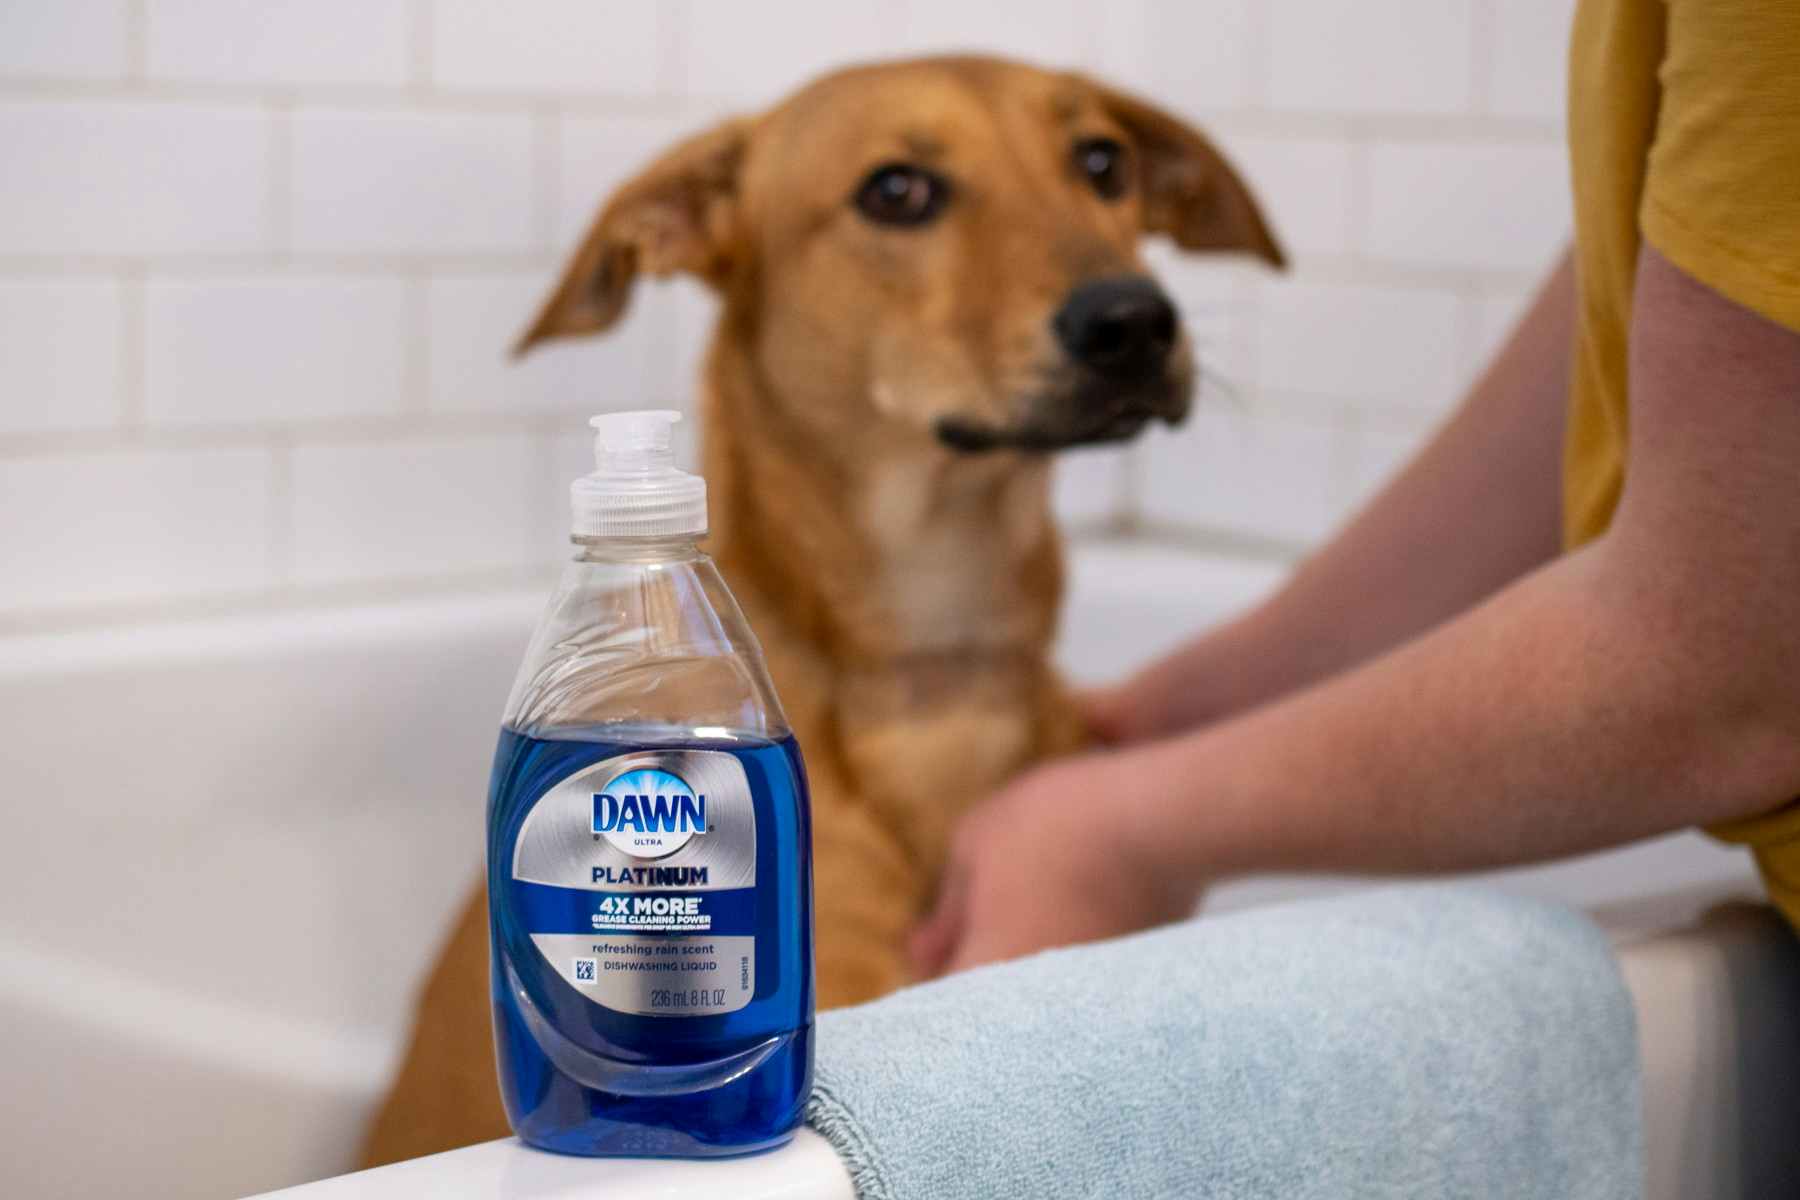 Give your dog a Dawn dish soap bath if he has fleas.